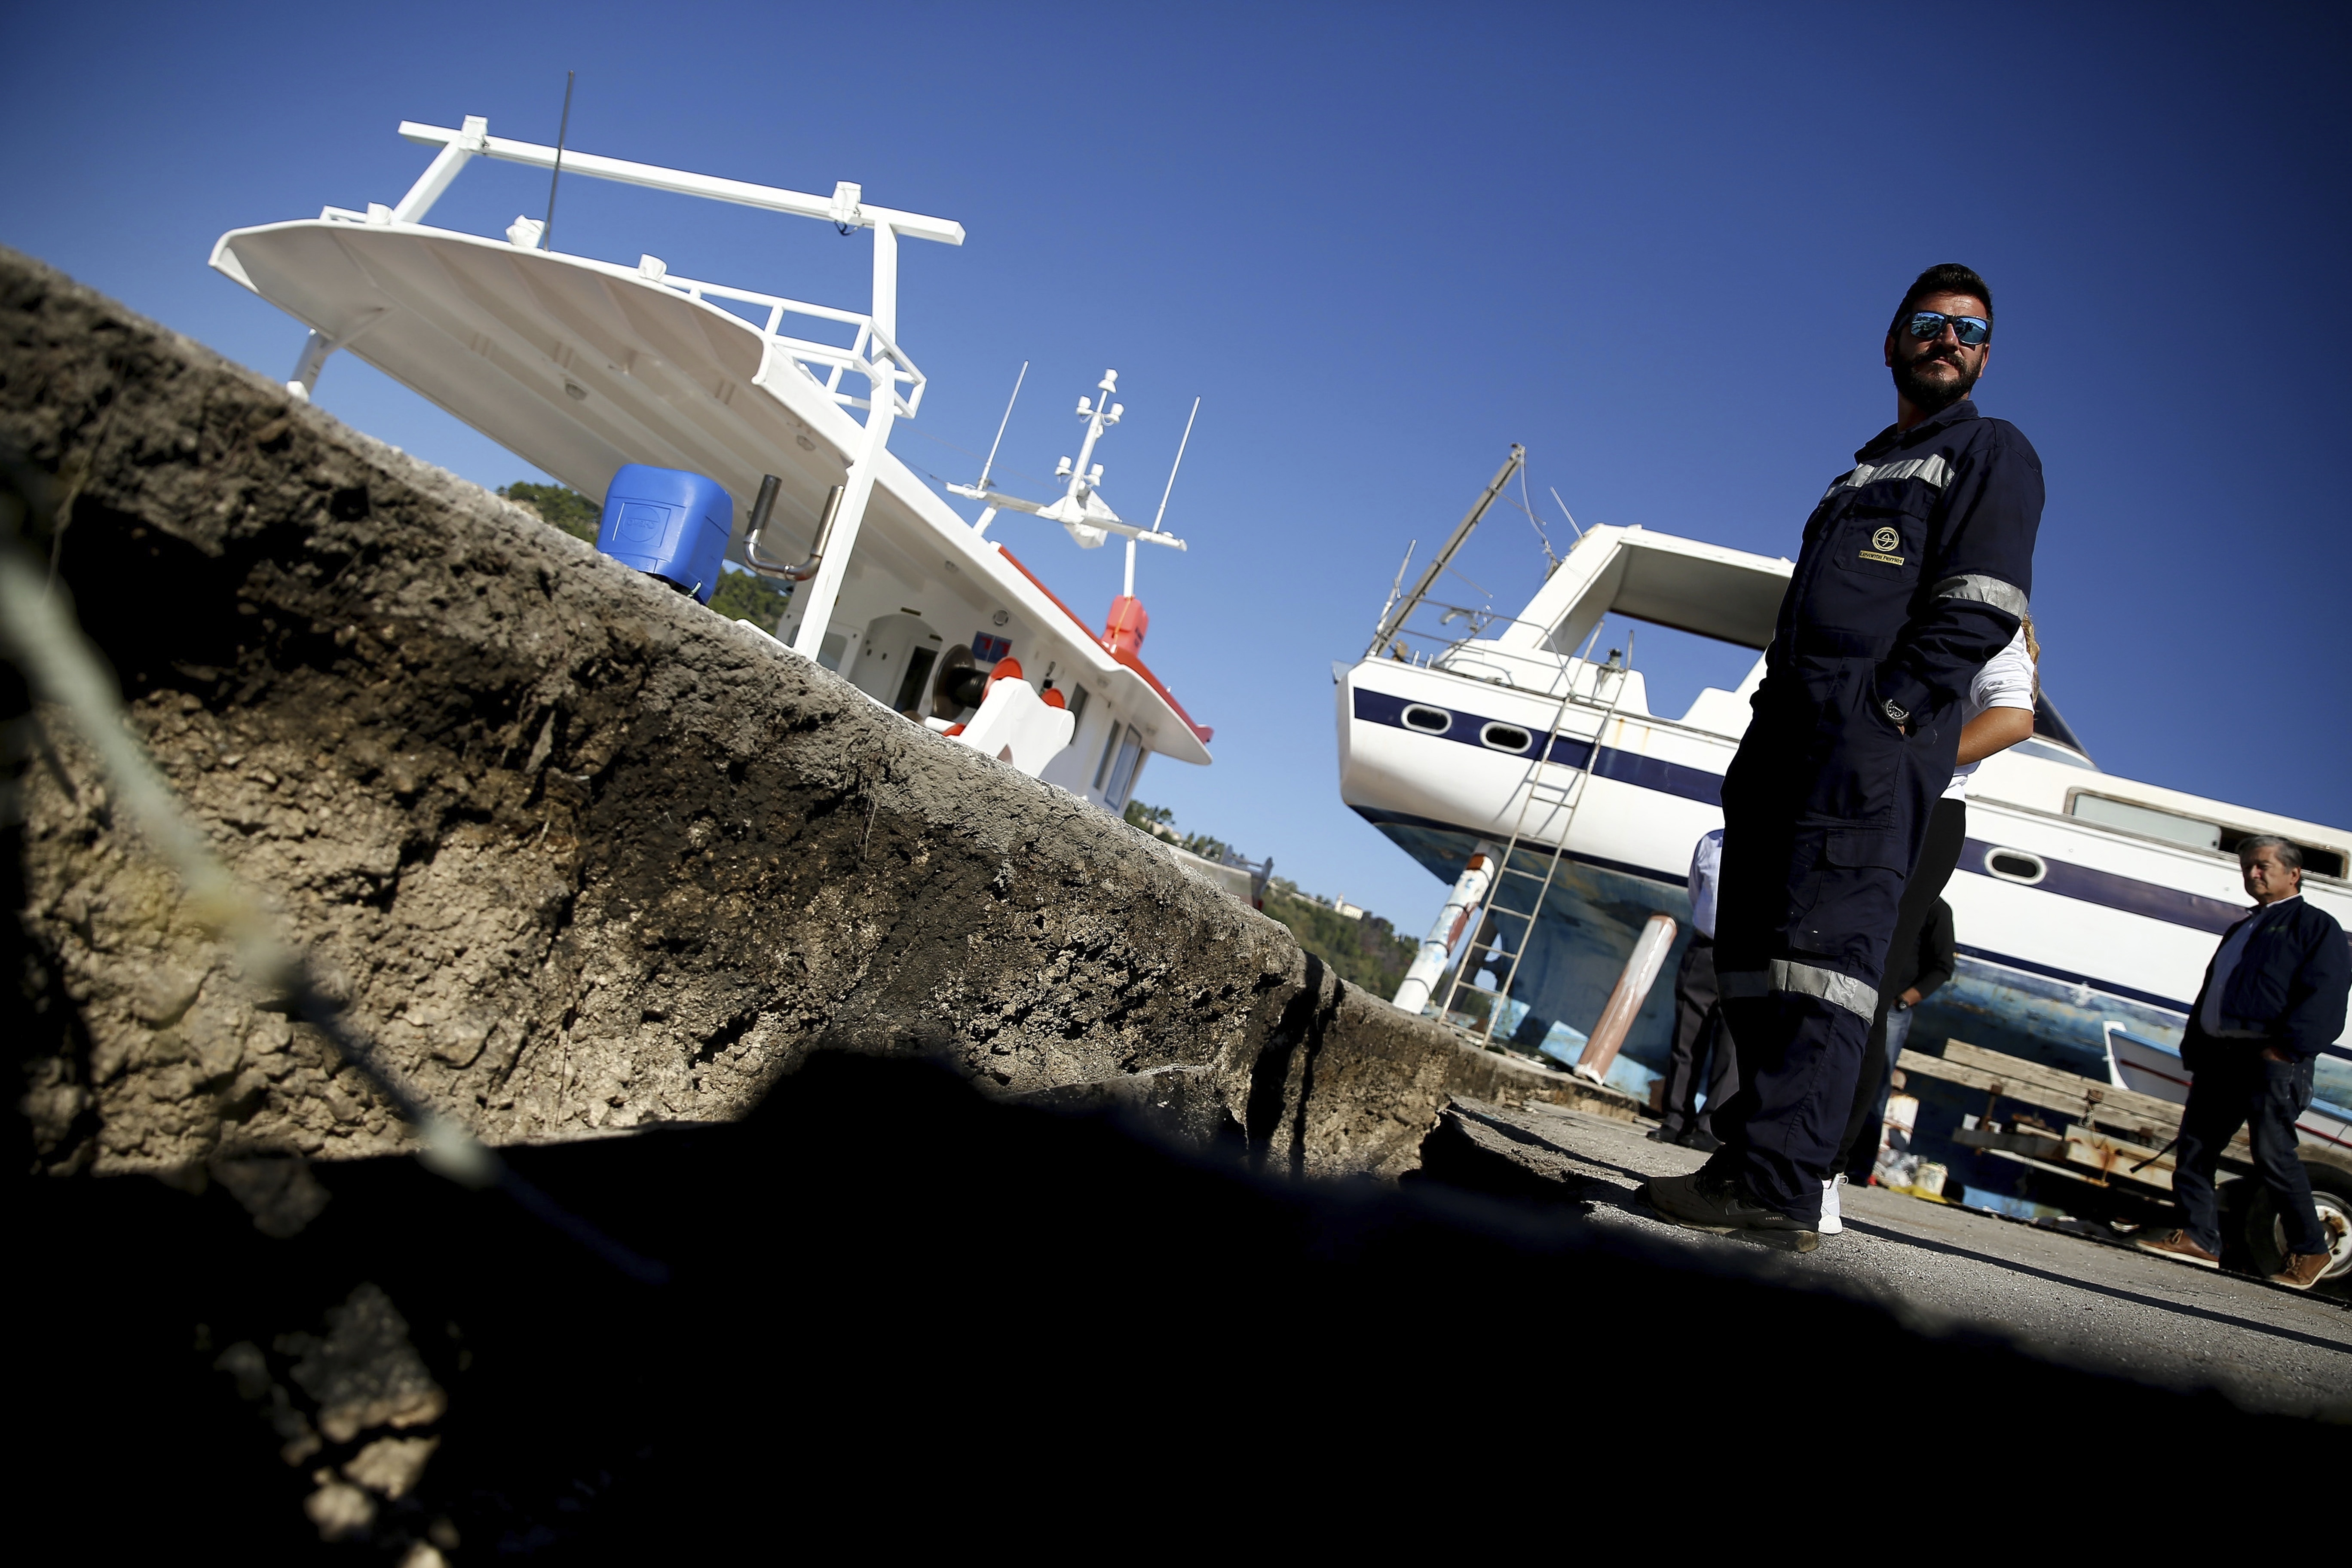 A worker stands over the cracked and warped sidewalk after an earthquake at the main harbor of Zakynthos island